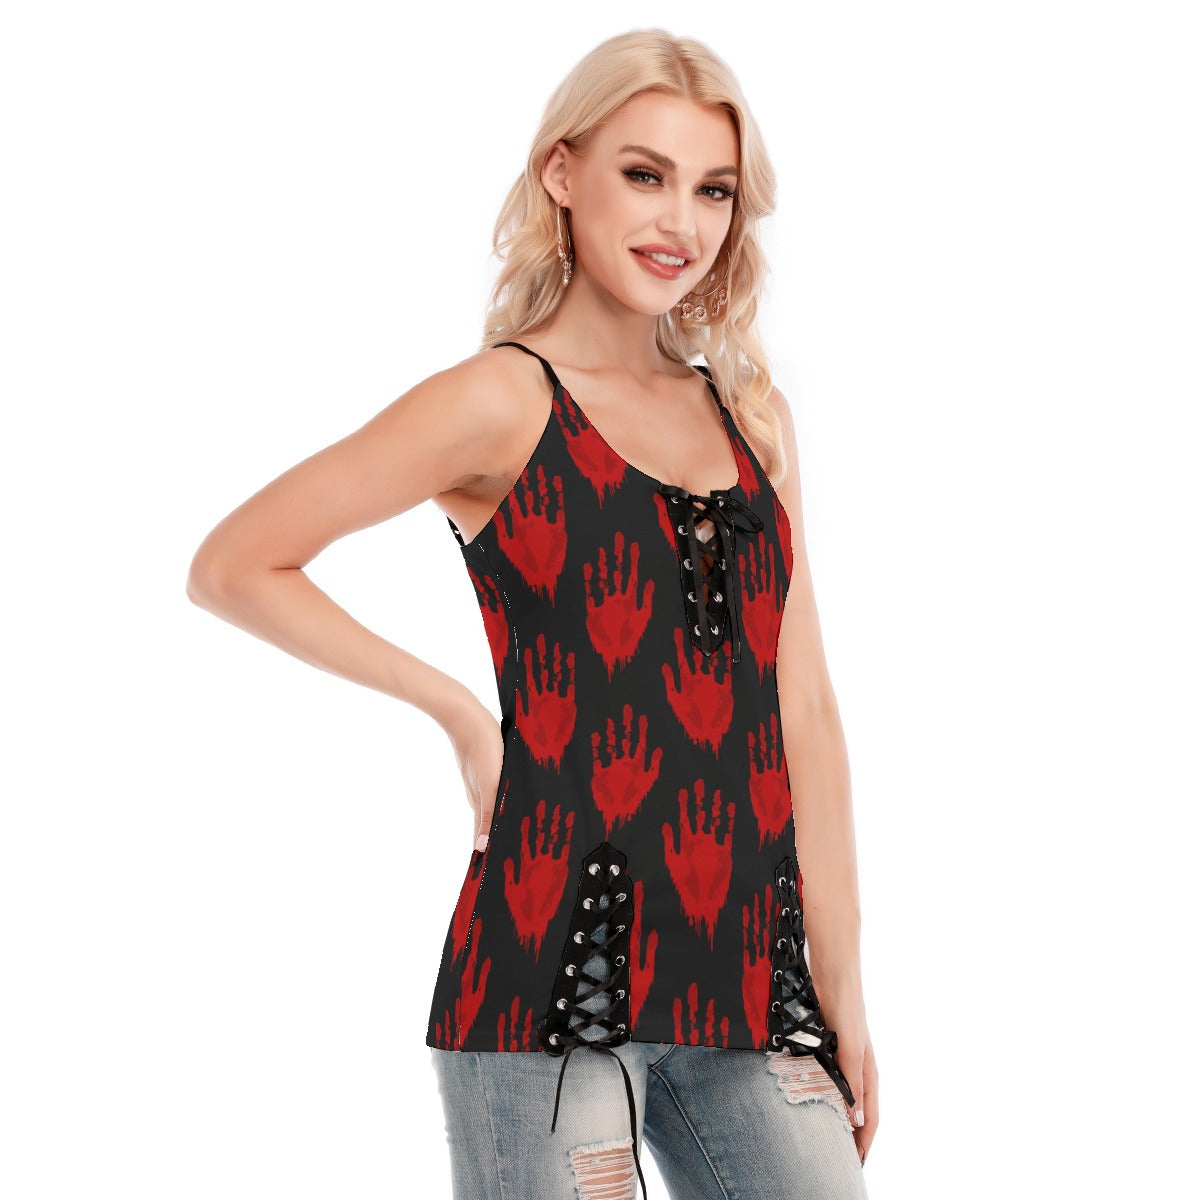 Bloody Hand Prints V-neck Eyelet Lace-up Cami Top